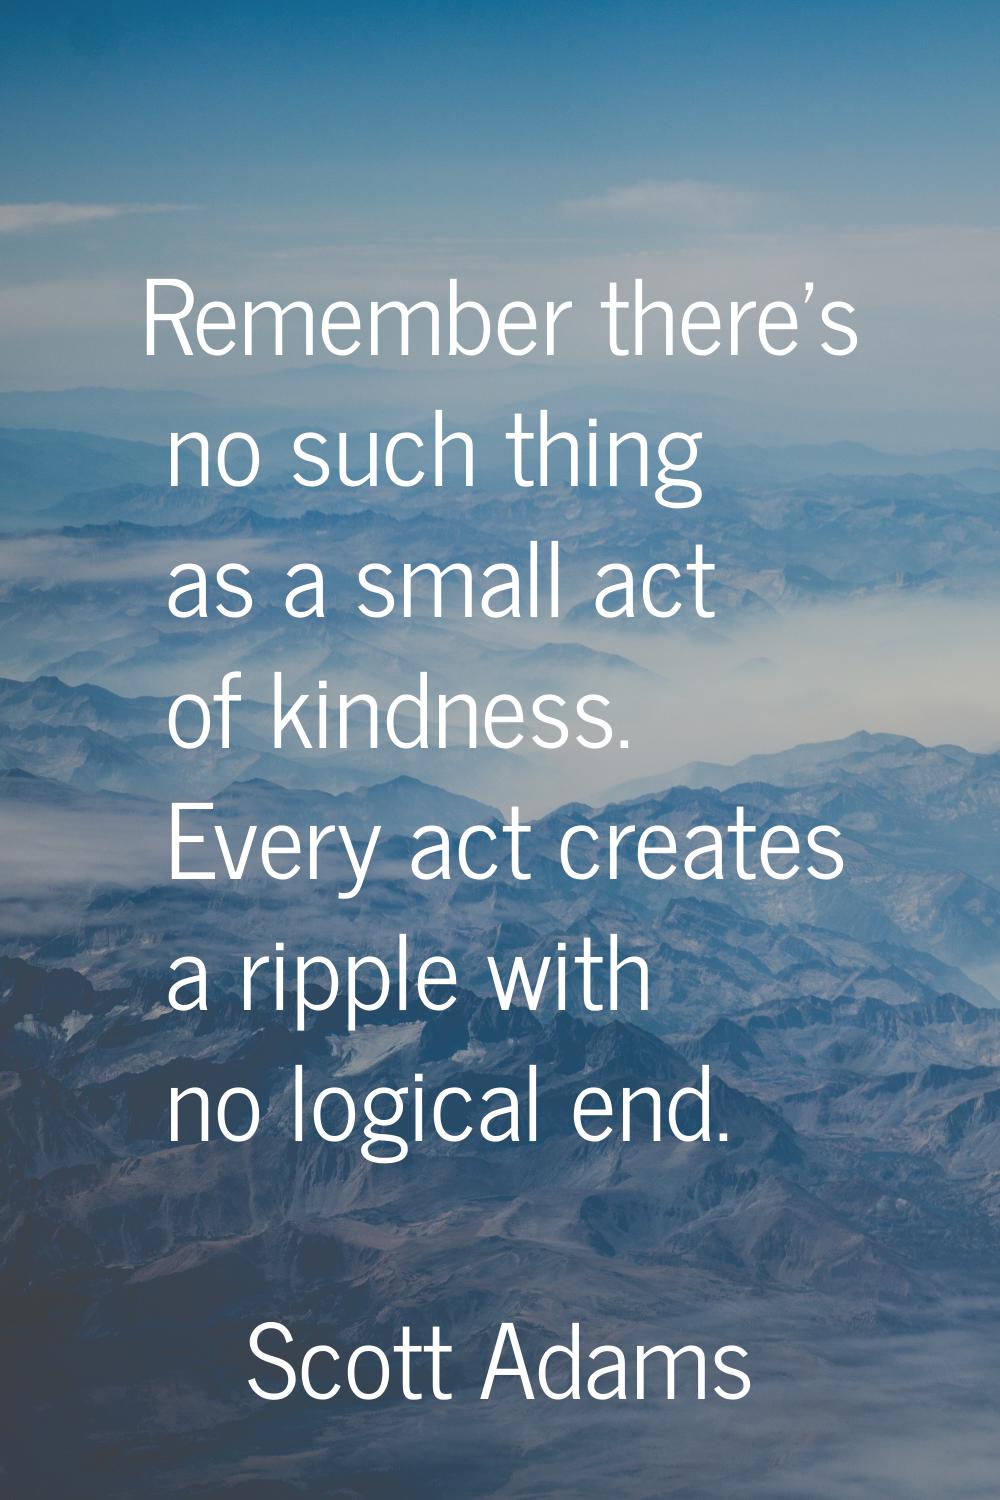 Remember there's no such thing as a small act of kindness. Every act creates a ripple with no logic